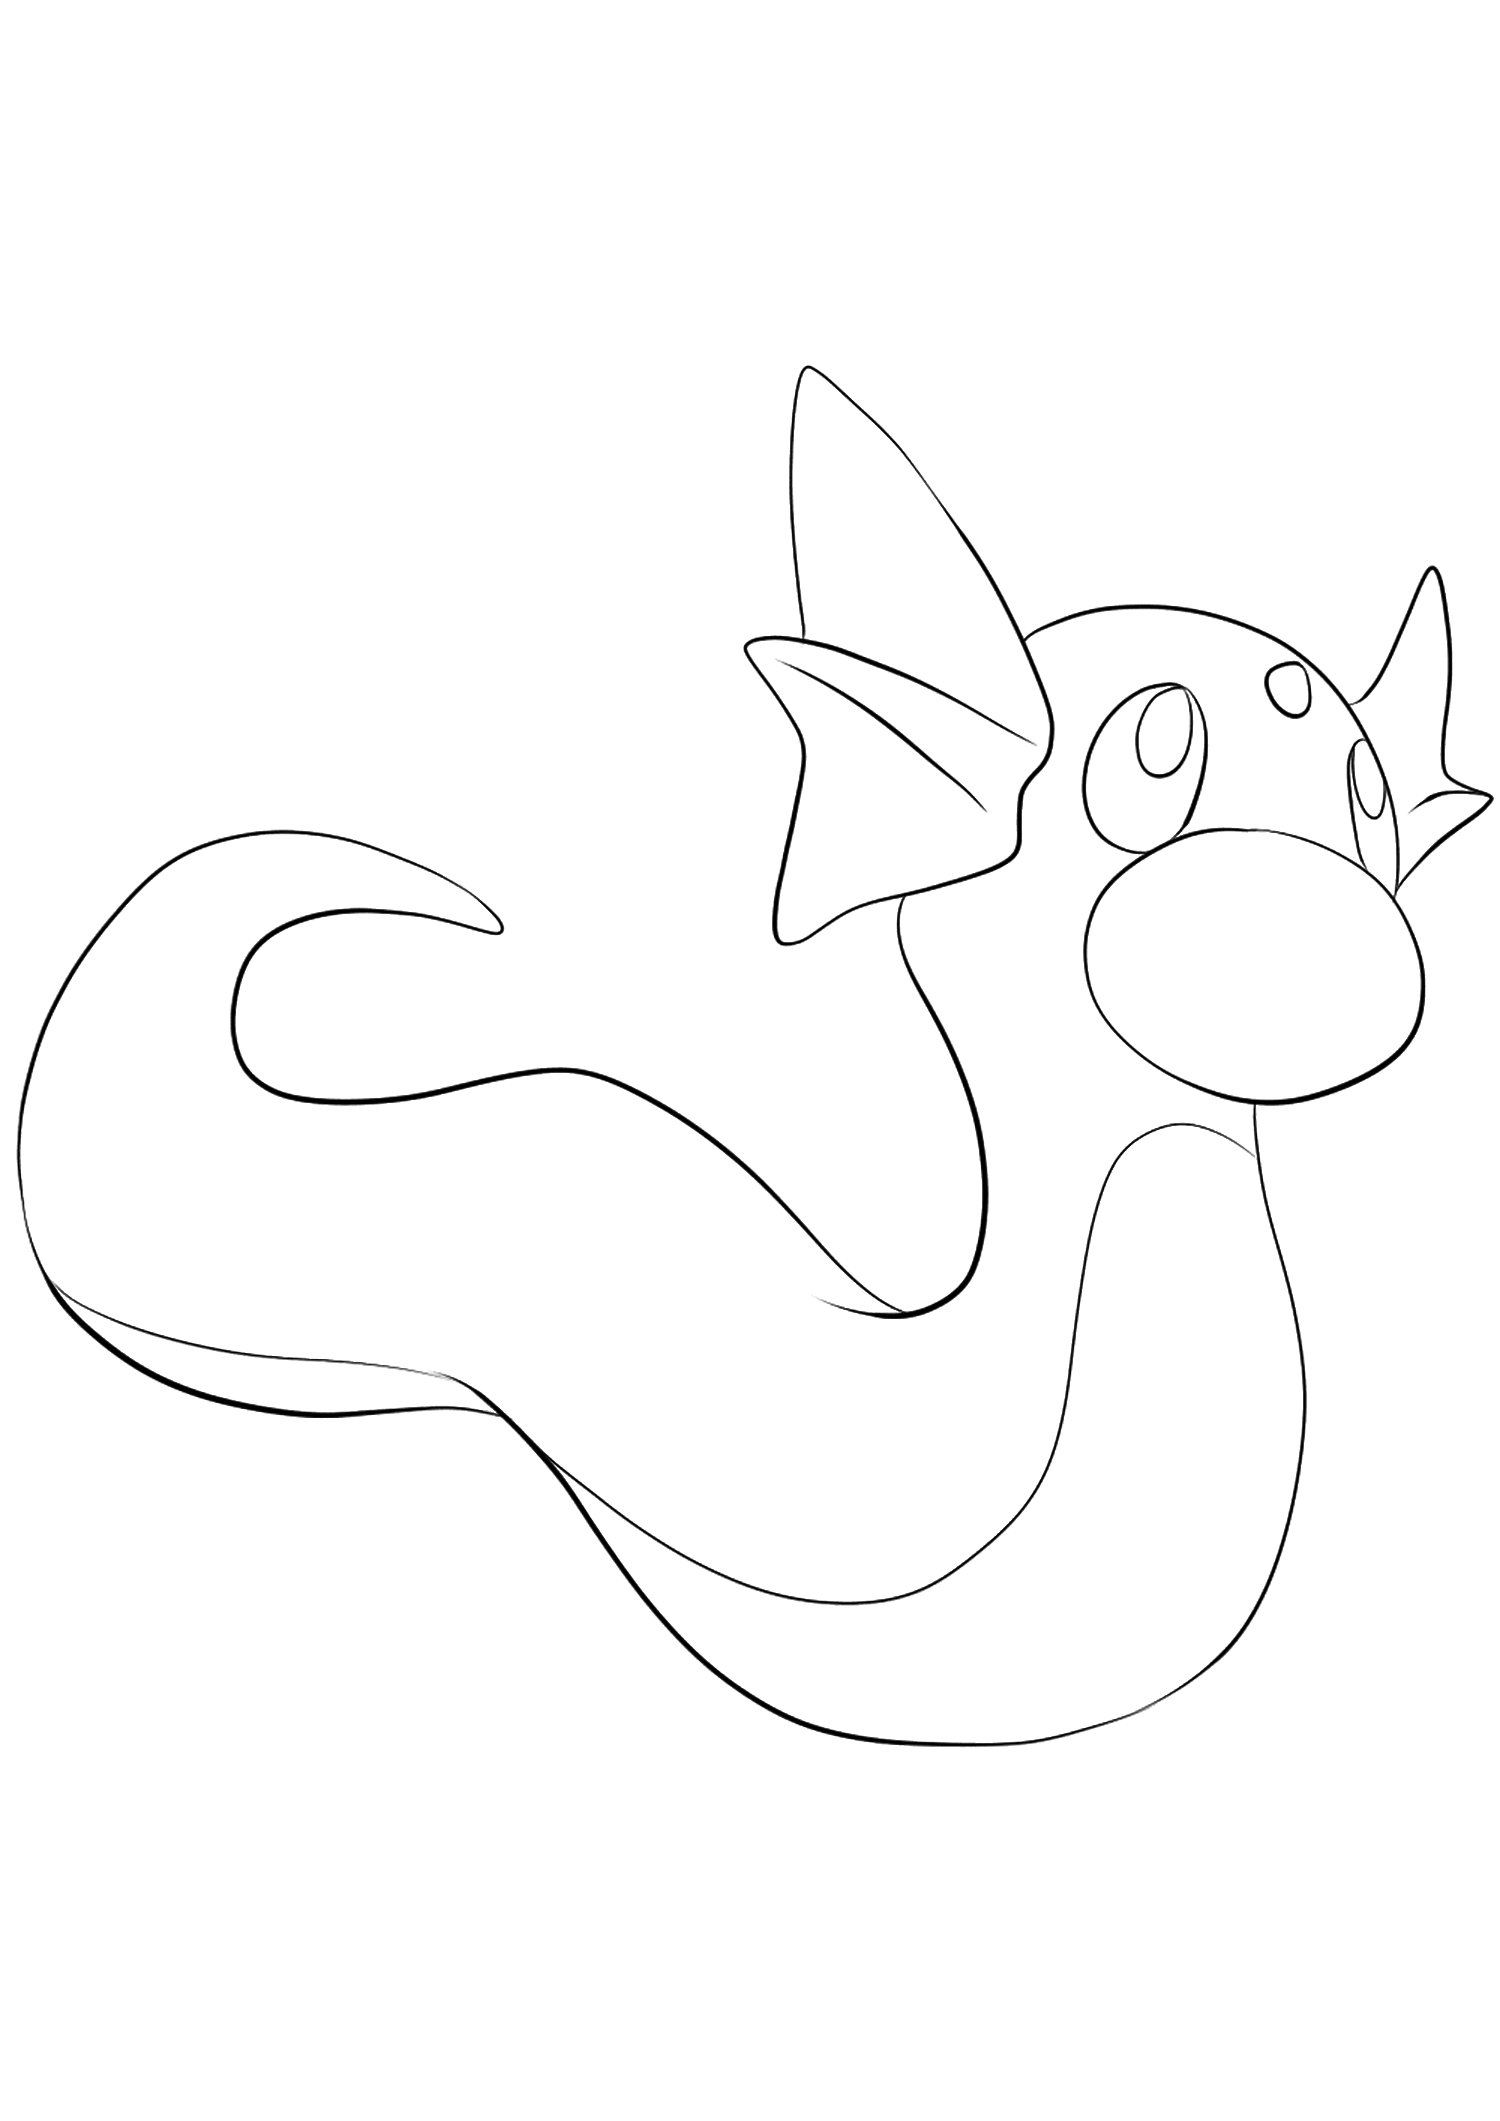 Dratini (No.147). Dratini Coloring page, Generation I Pokemon of type DragonOriginal image credit: Pokemon linearts by Lilly Gerbil on Deviantart.Permission:  All rights reserved © Pokemon company and Ken Sugimori.